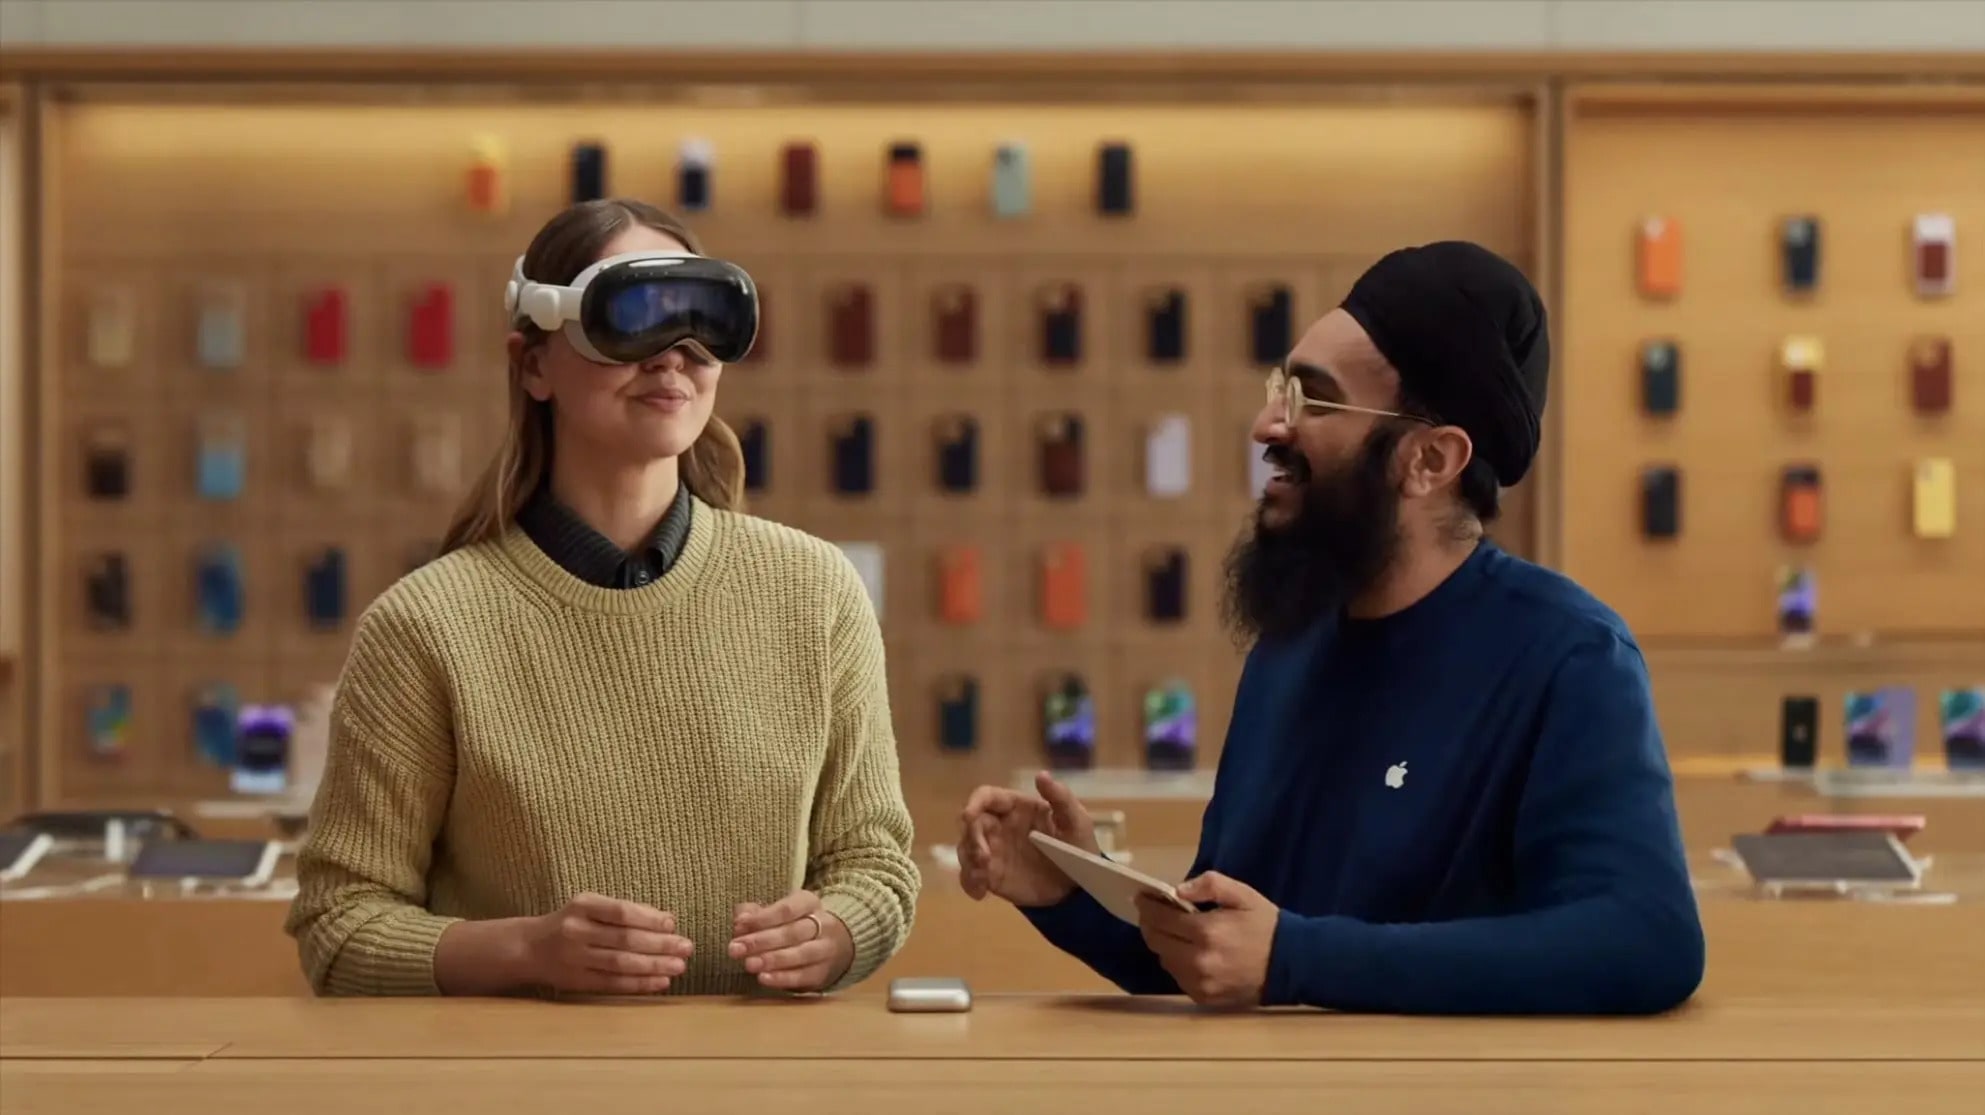 Apple Store staff shows customers how to use the Vision Pro headset.